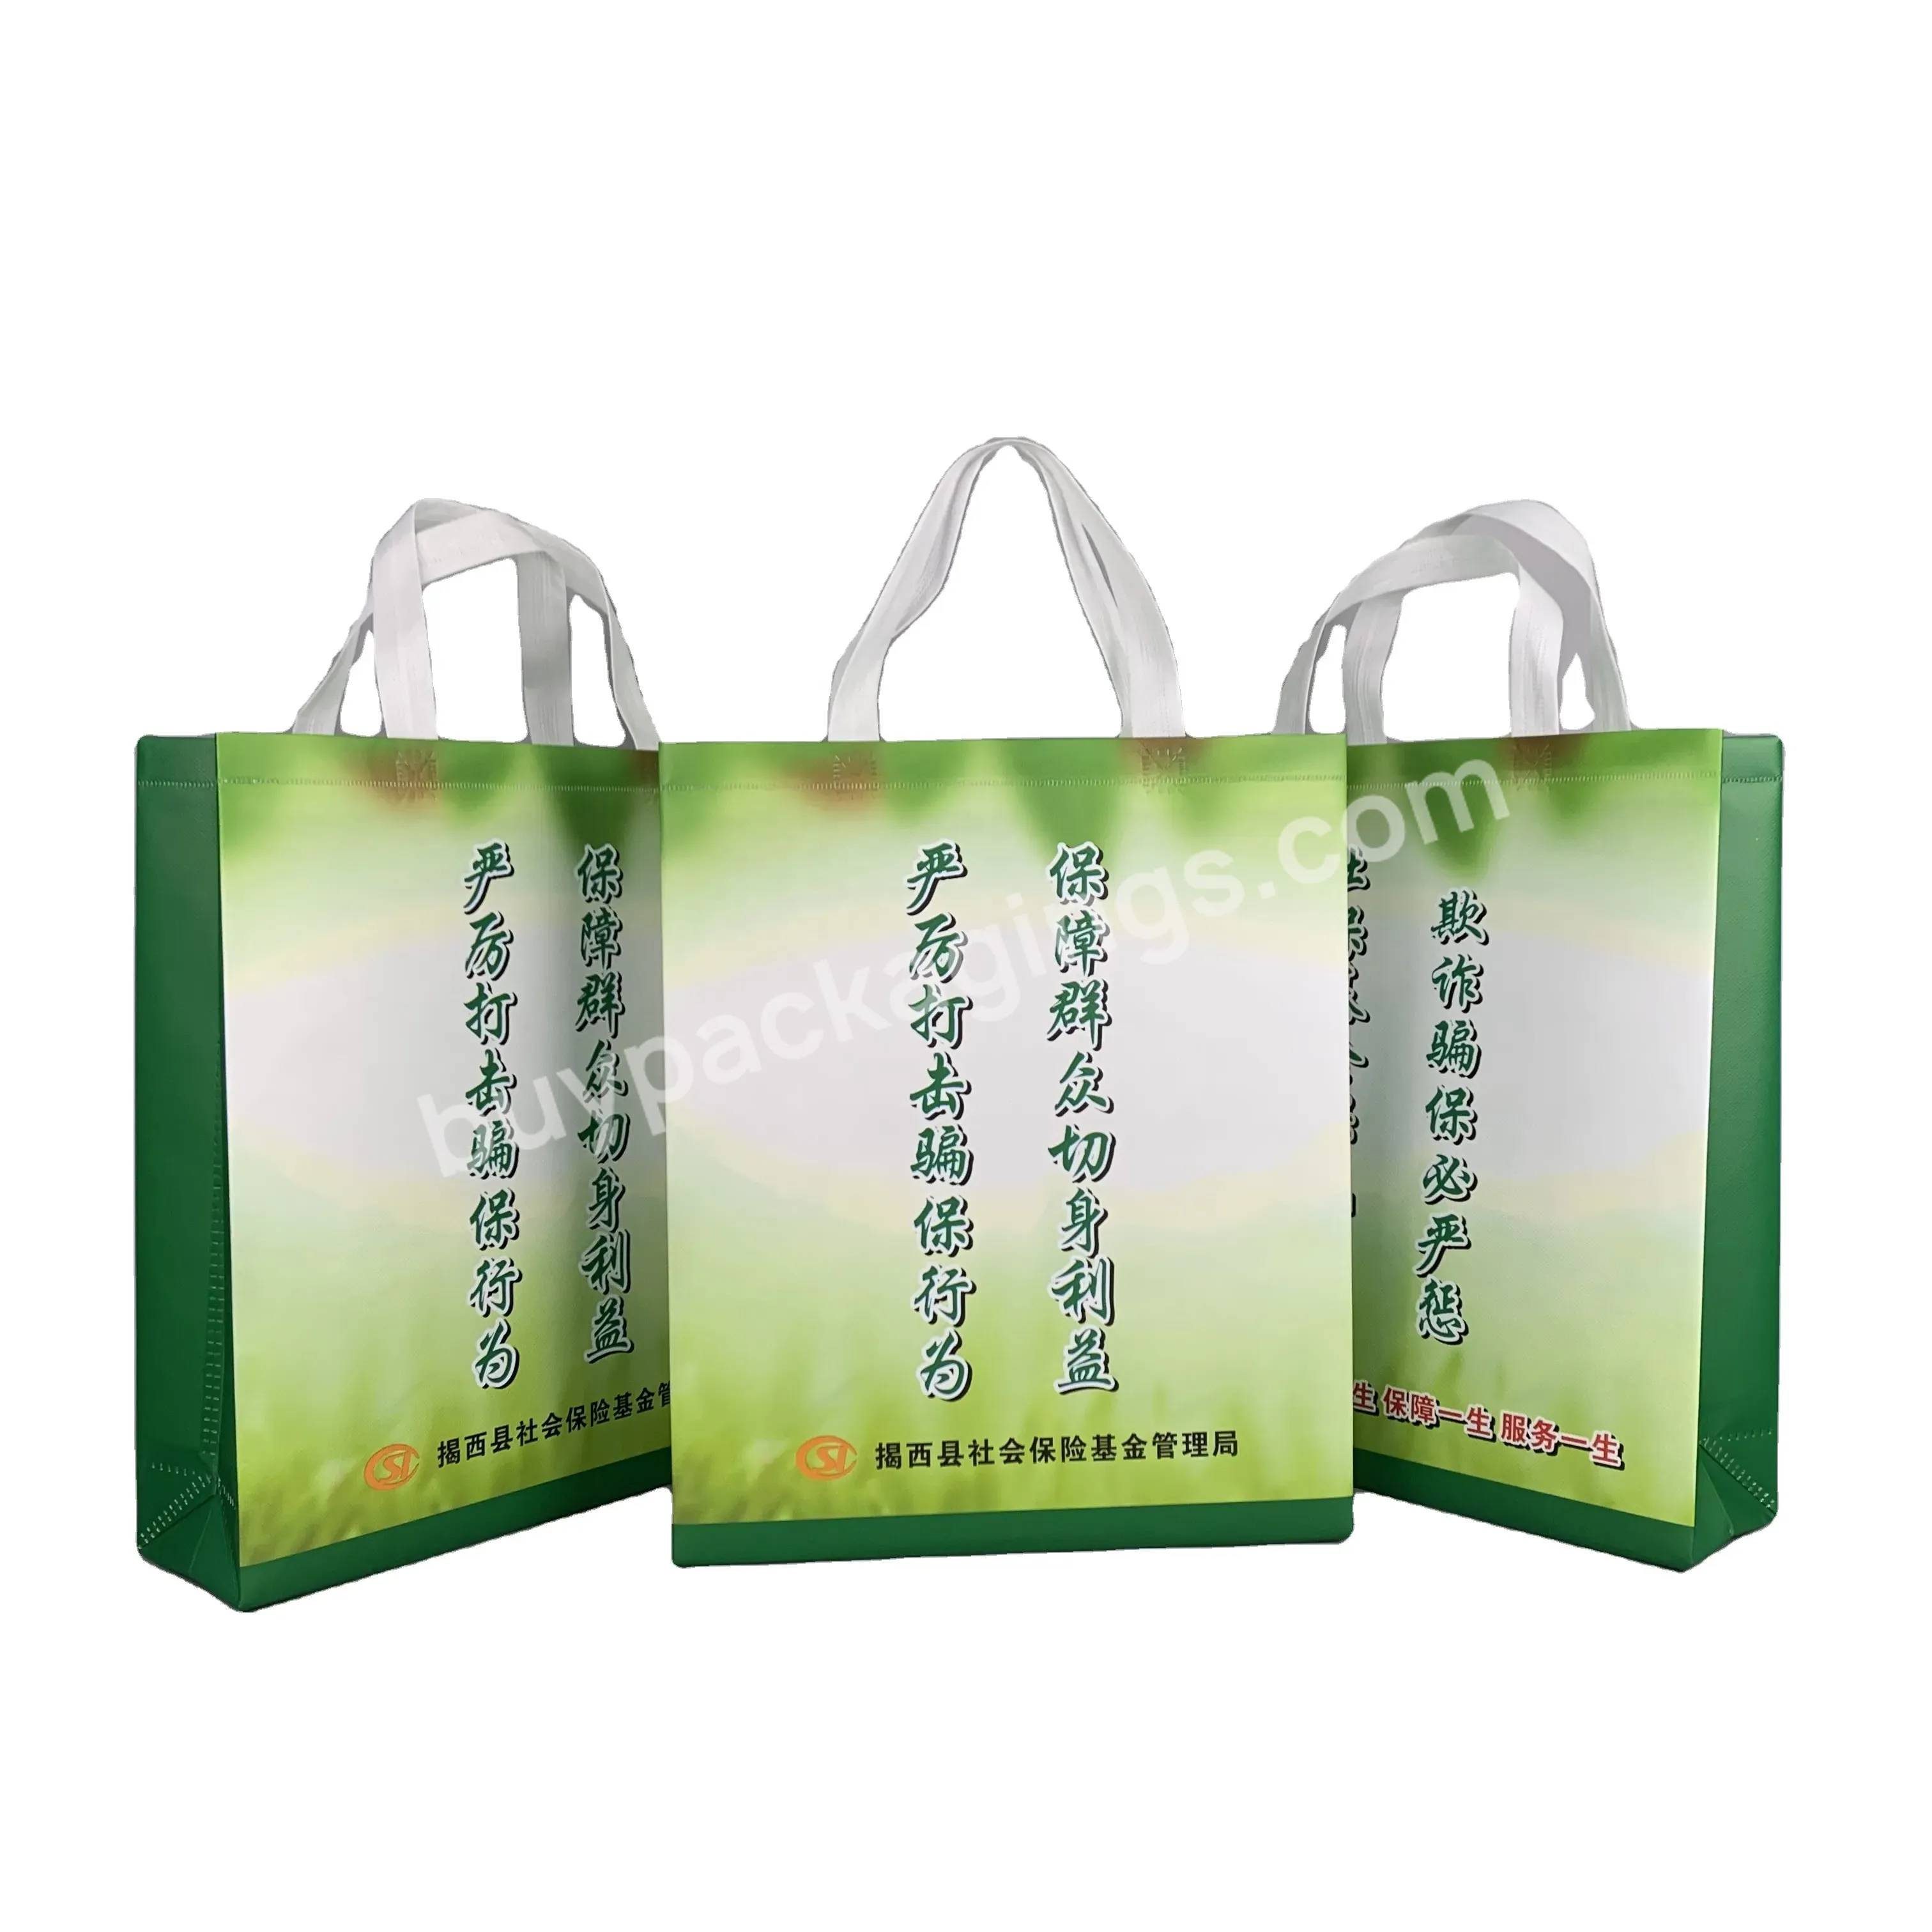 Whole Sale Tough Recyclable Ecological Biodegradable Waterproof Non Woven Bag With Handle